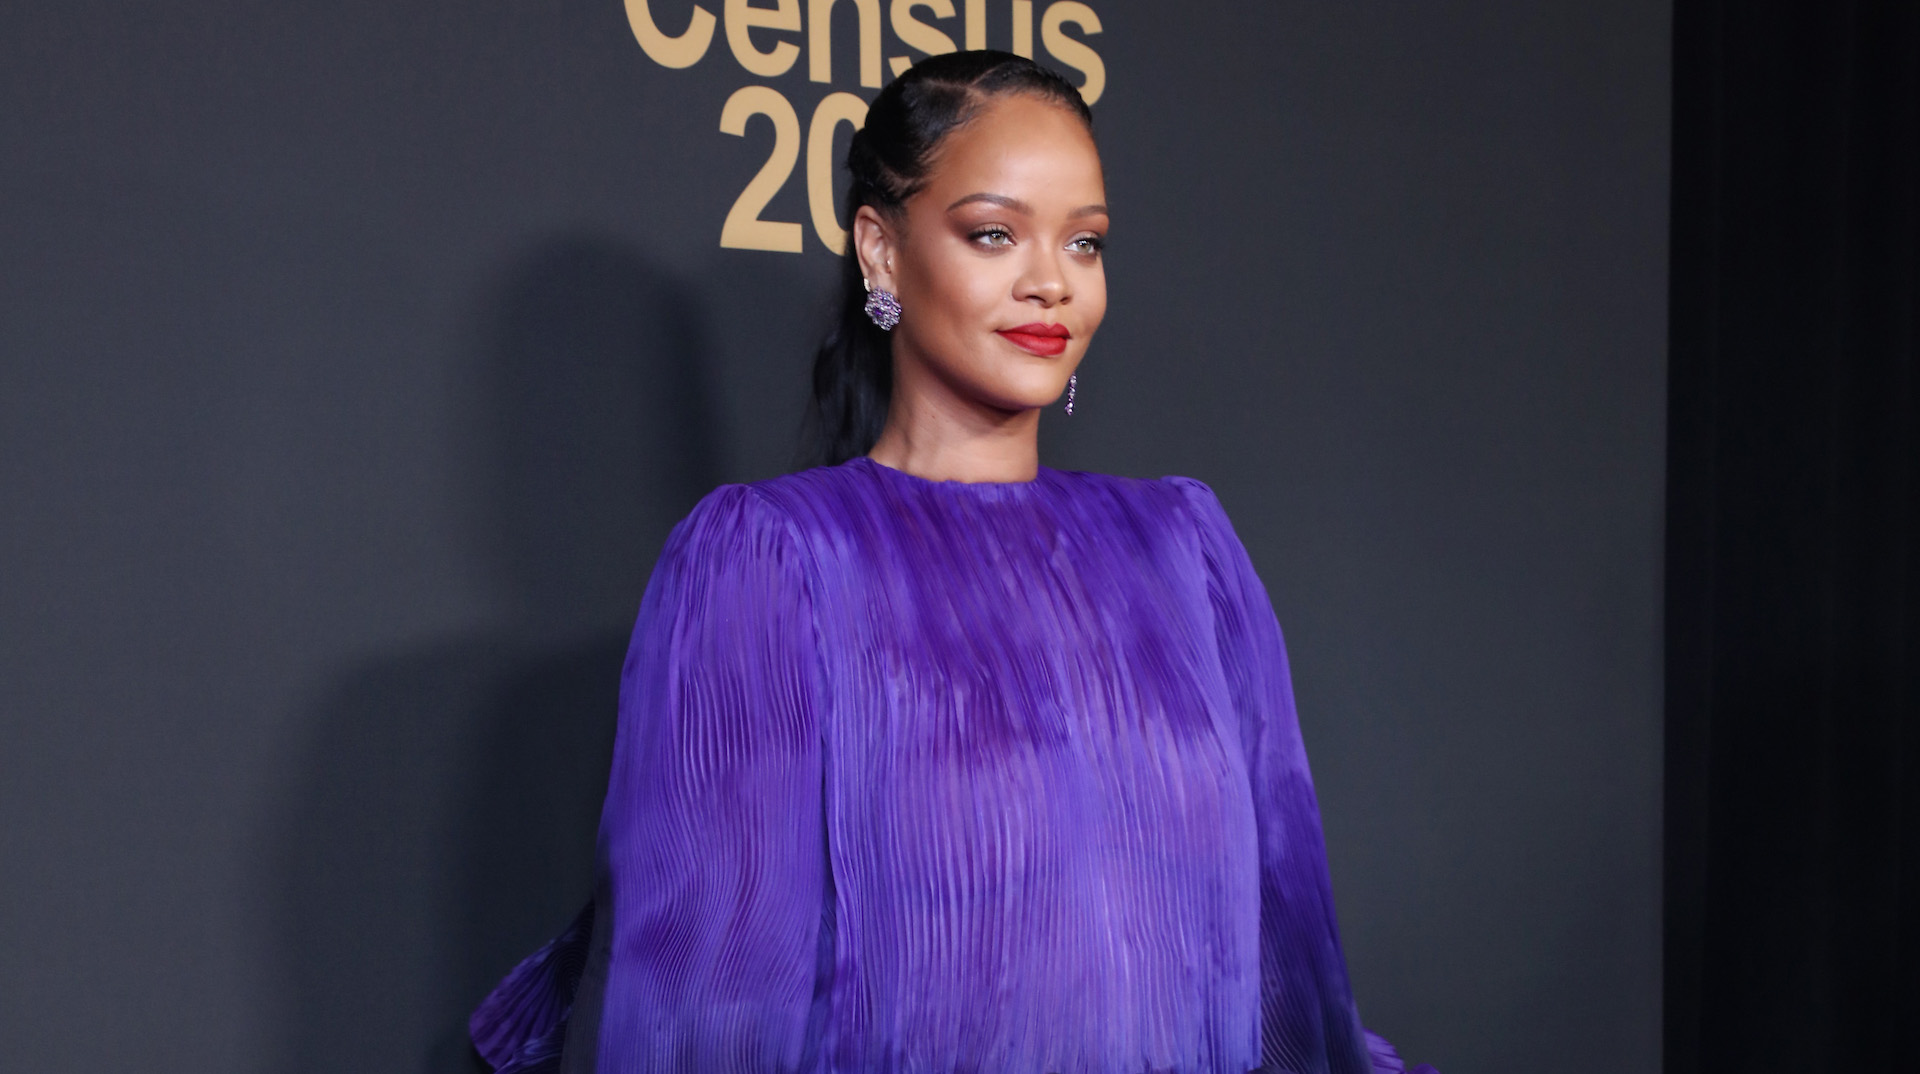 Rihanna Passes JAY-Z and Beatles on Top 40 Hot 100 Hits List With PARTYNEXTDOOR Feature